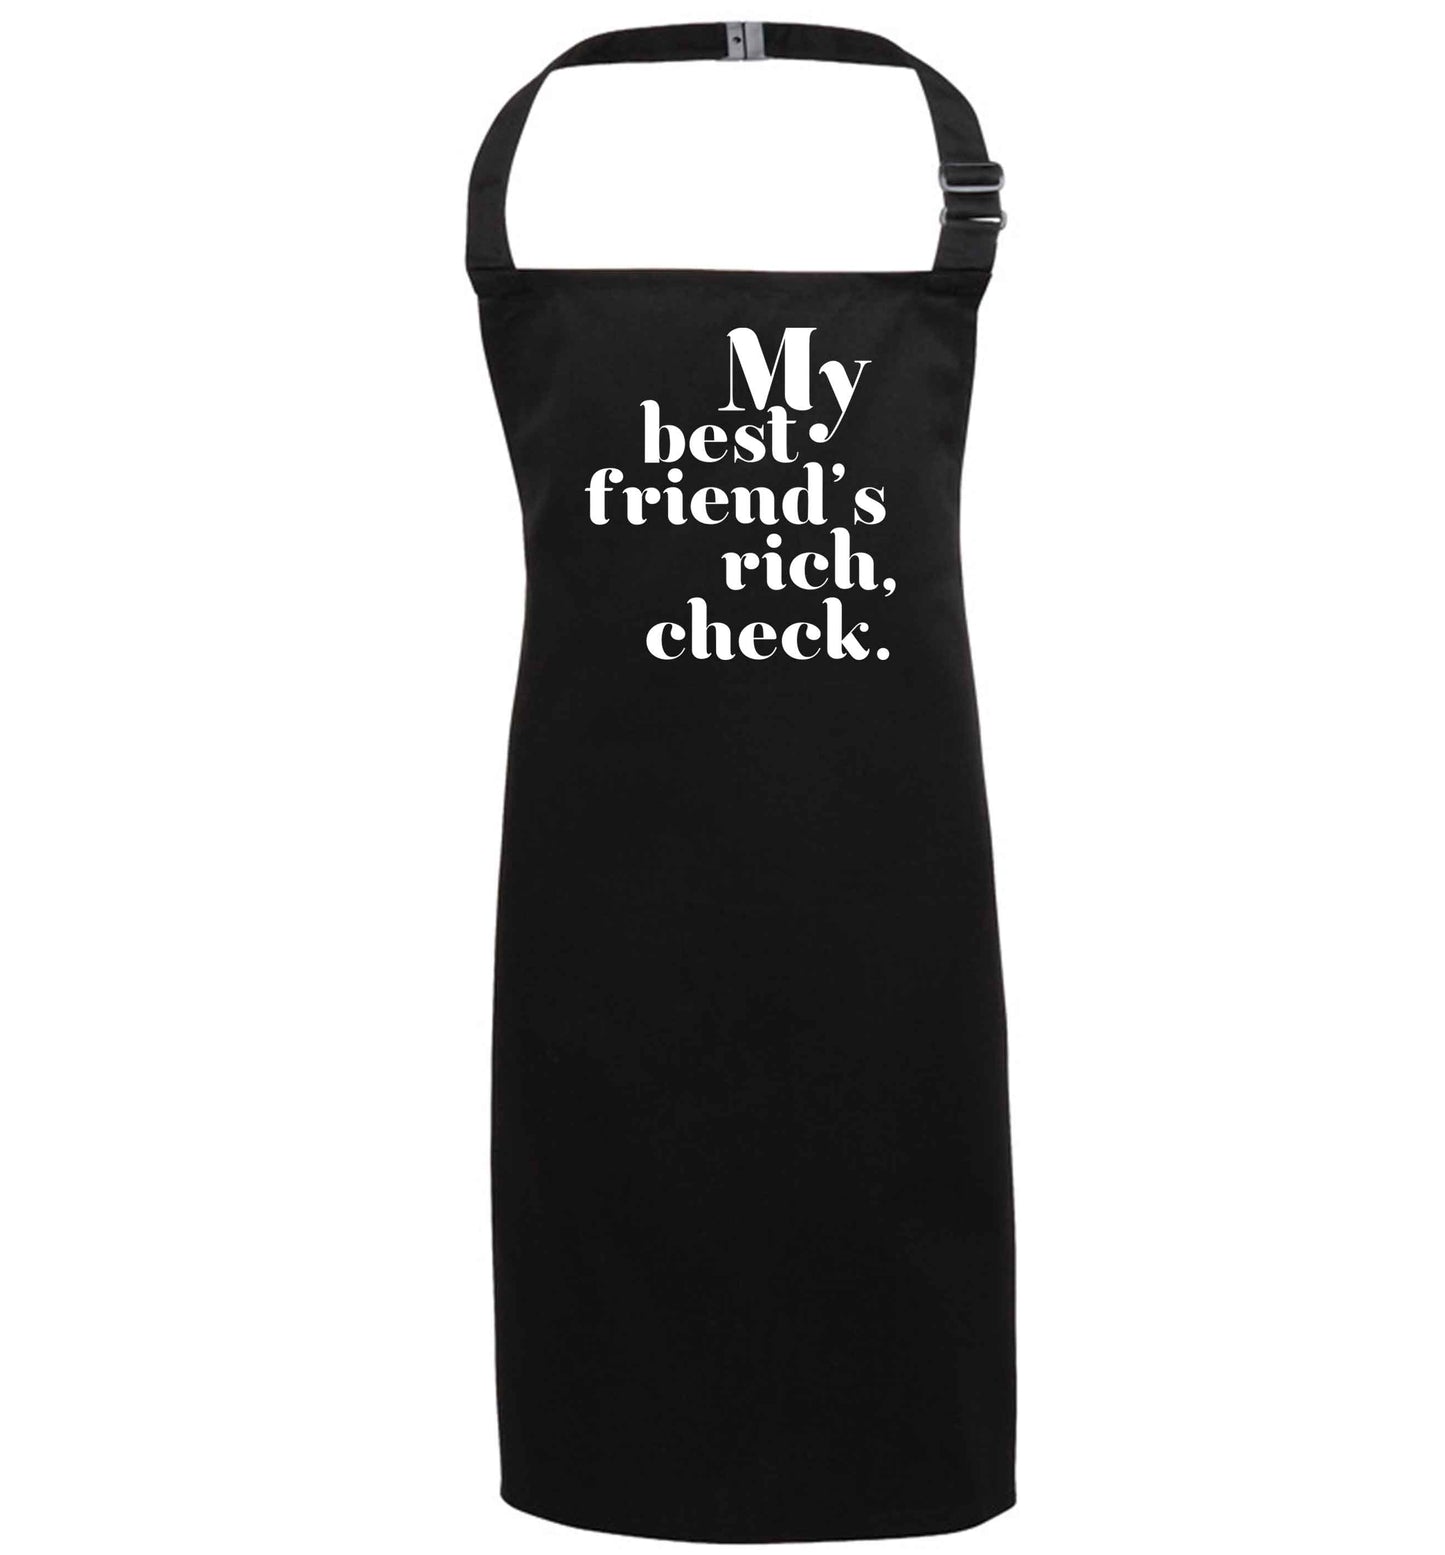 Got a rich best friend? Why not ask them to get you this, just let us  know and we'll tripple the price ;)  black apron 7-10 years